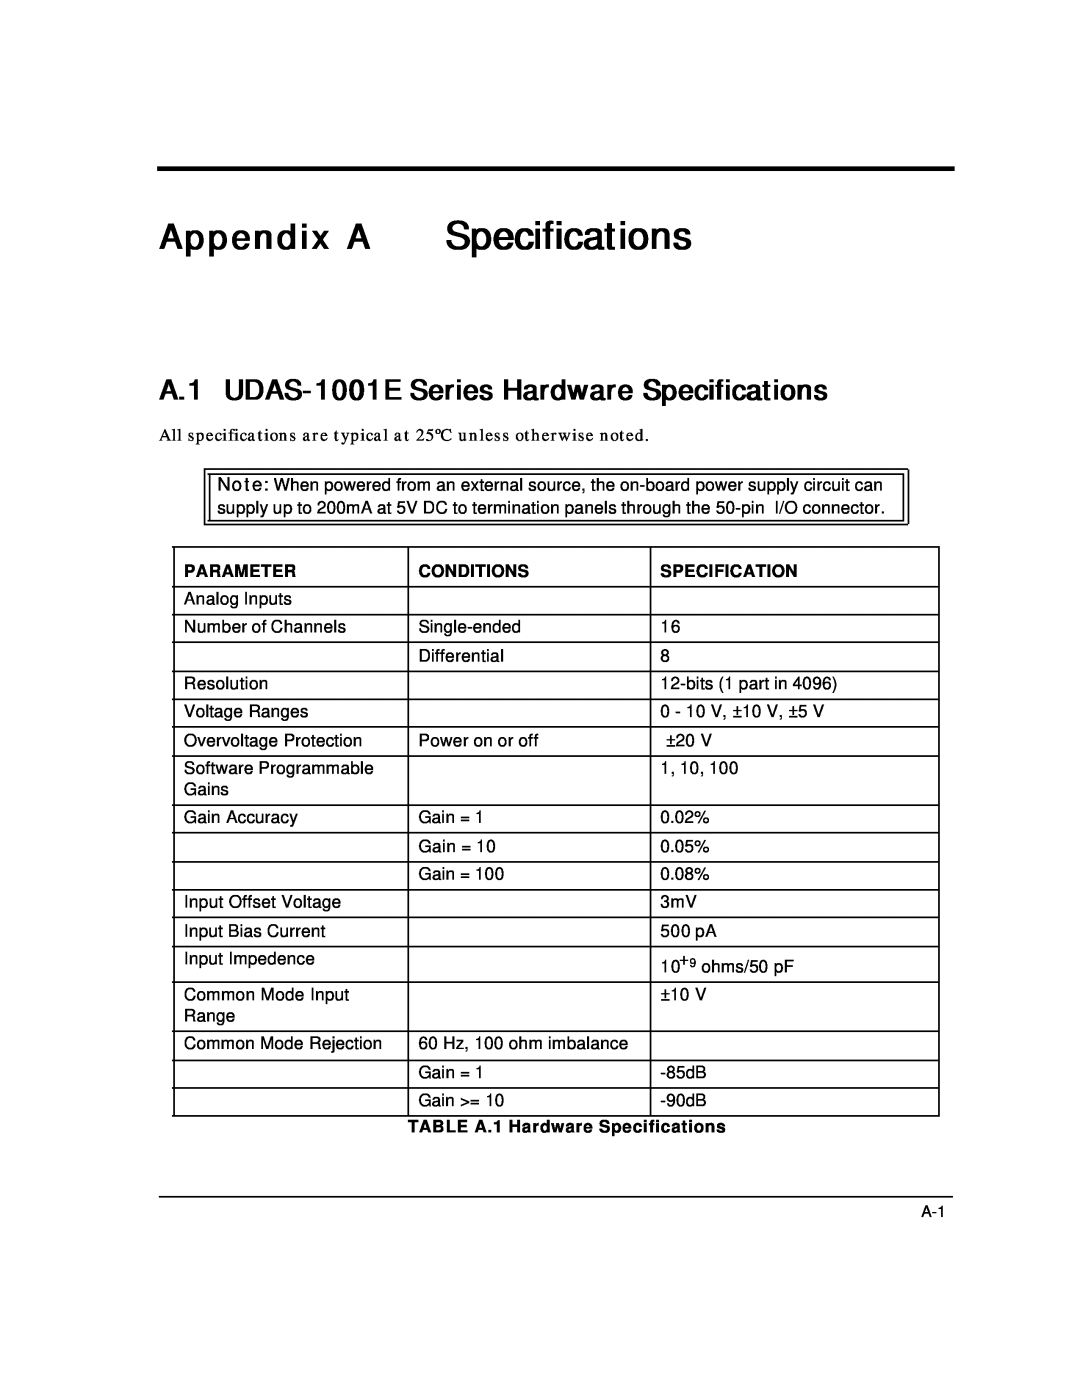 Intelligent Motion Systems Appendix A, A.1 UDAS-1001E Series Hardware Specifications, Parameter, Conditions 